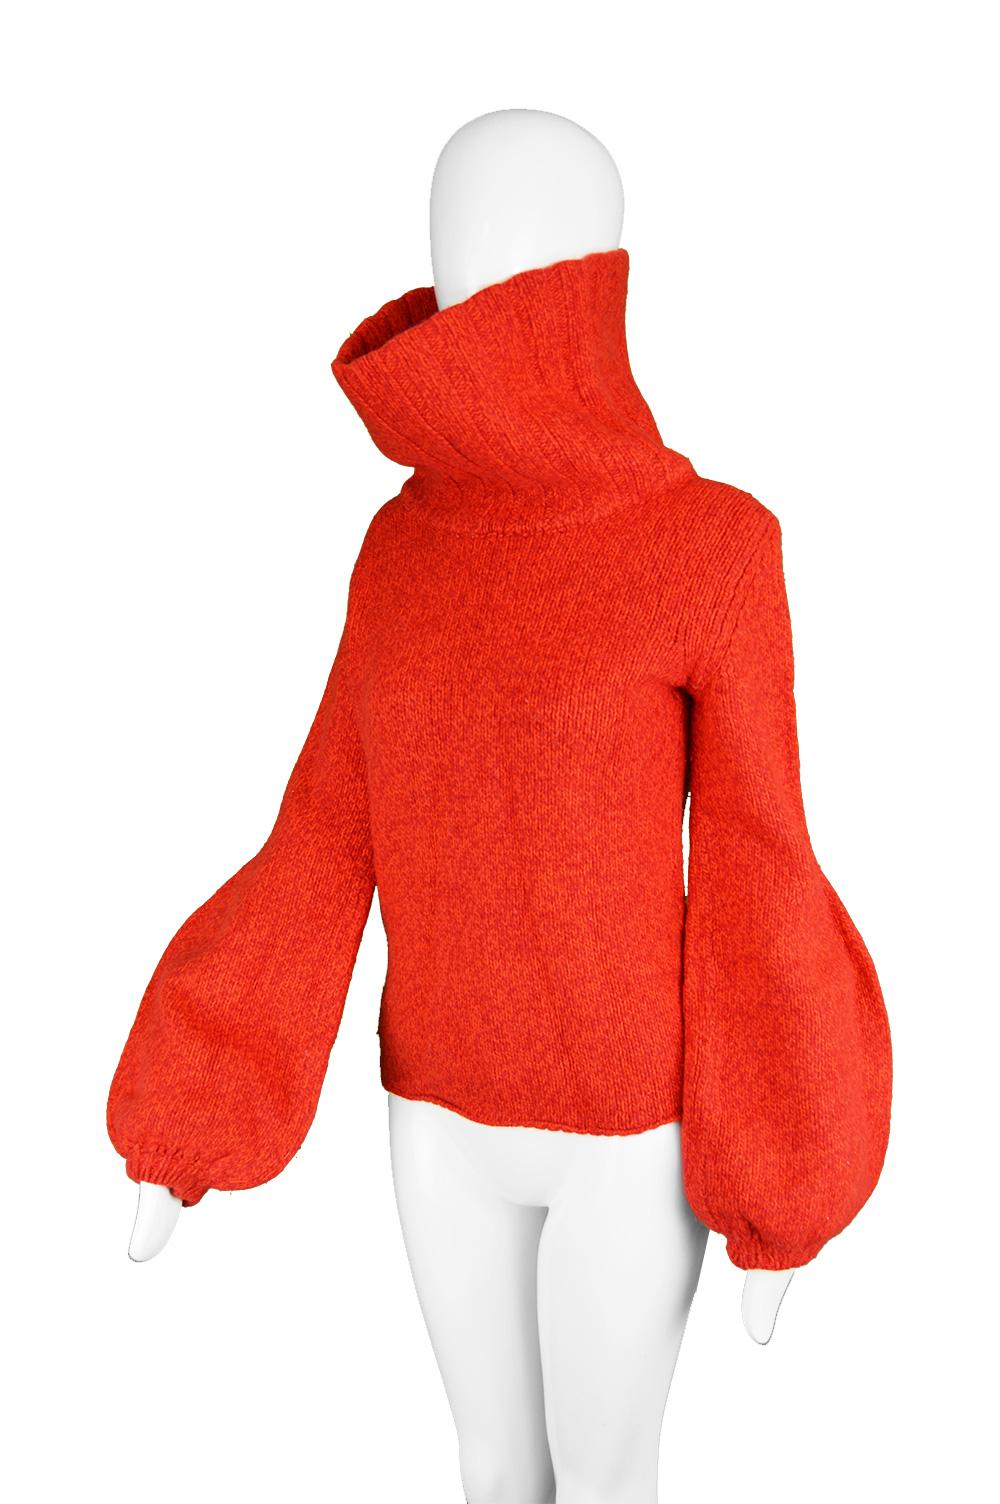 Mila Schon Vintage Red Wool & Cashmere Balloon Sleeve Roll Neck Sweater, 1980s (Rot)